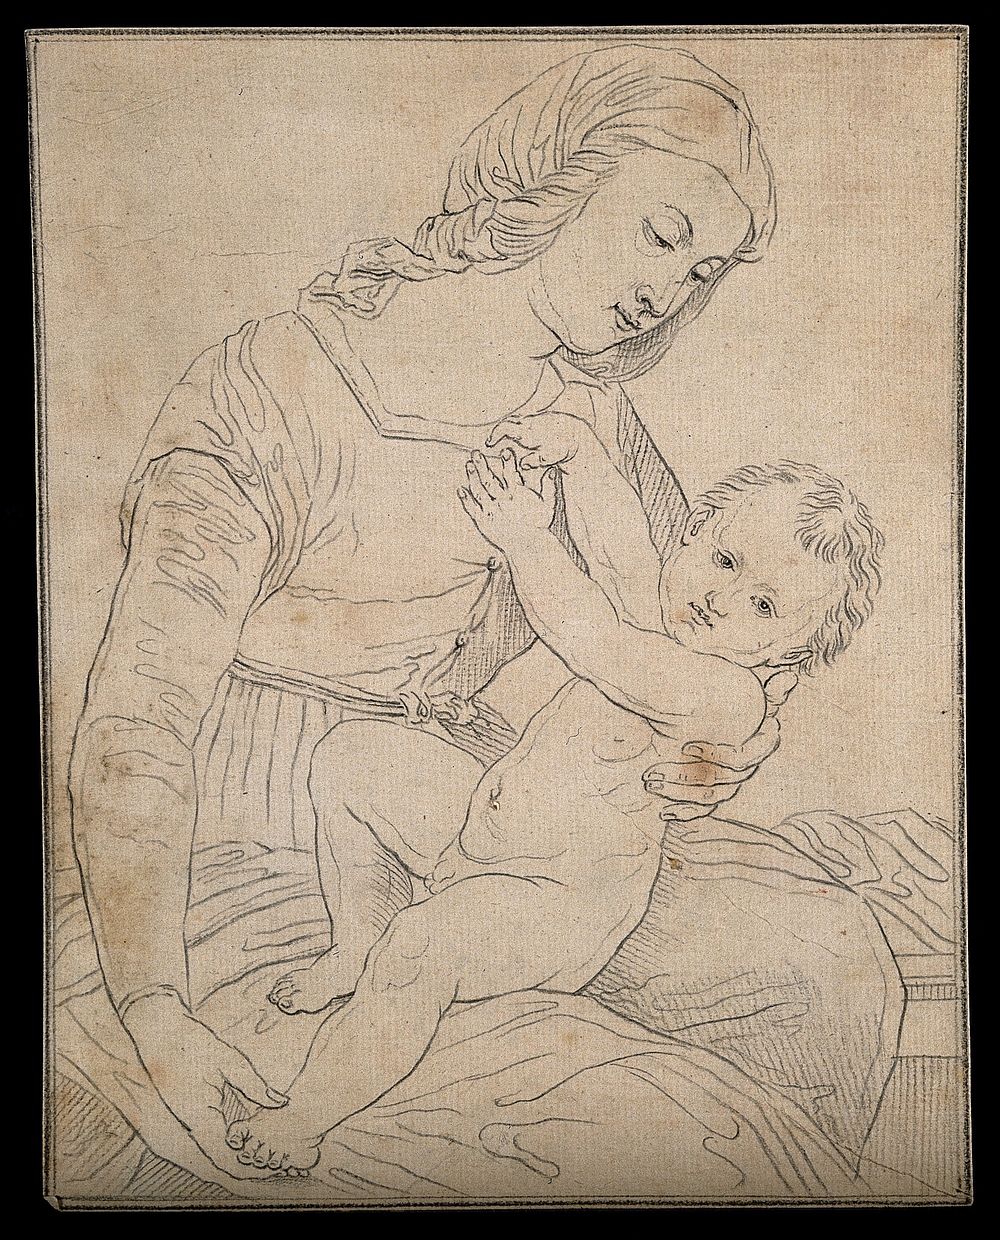 The Virgin Mary with the child Jesus. Drawing, c. 1791, after Raphael.